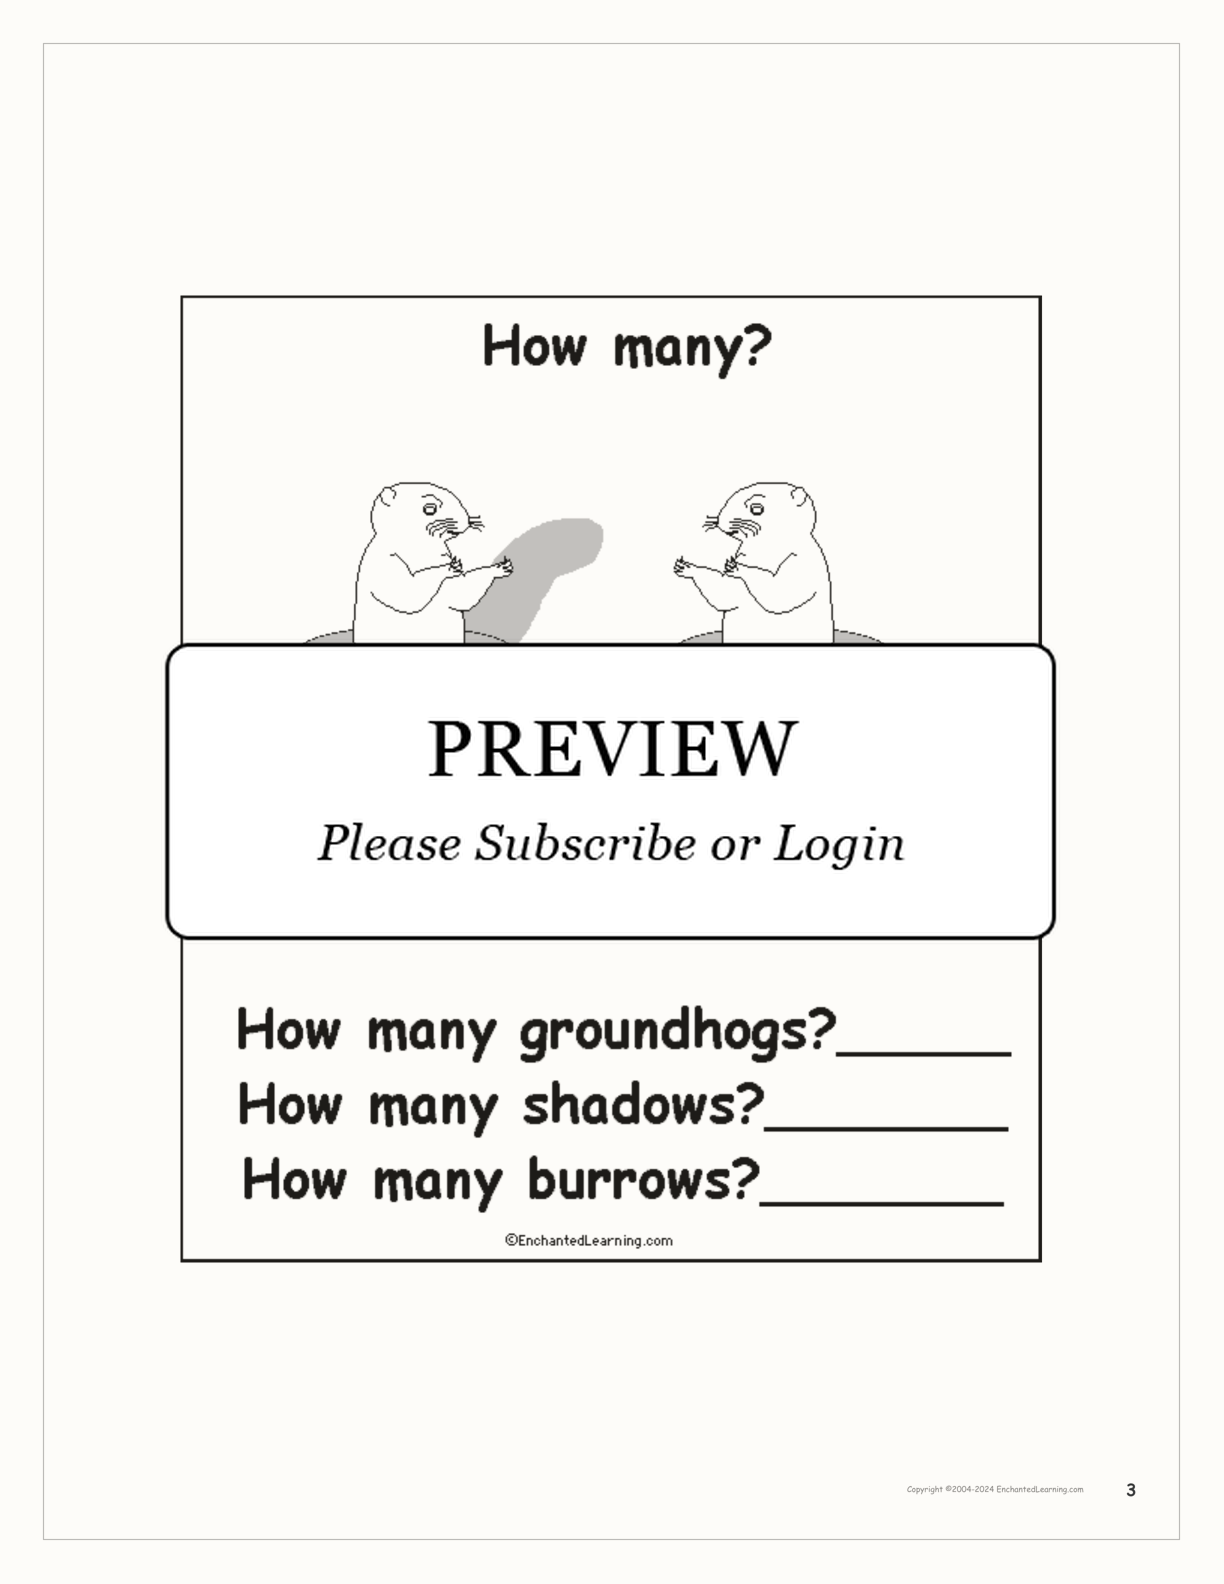 'Groundhog Day: How Many?' interactive worksheet page 3